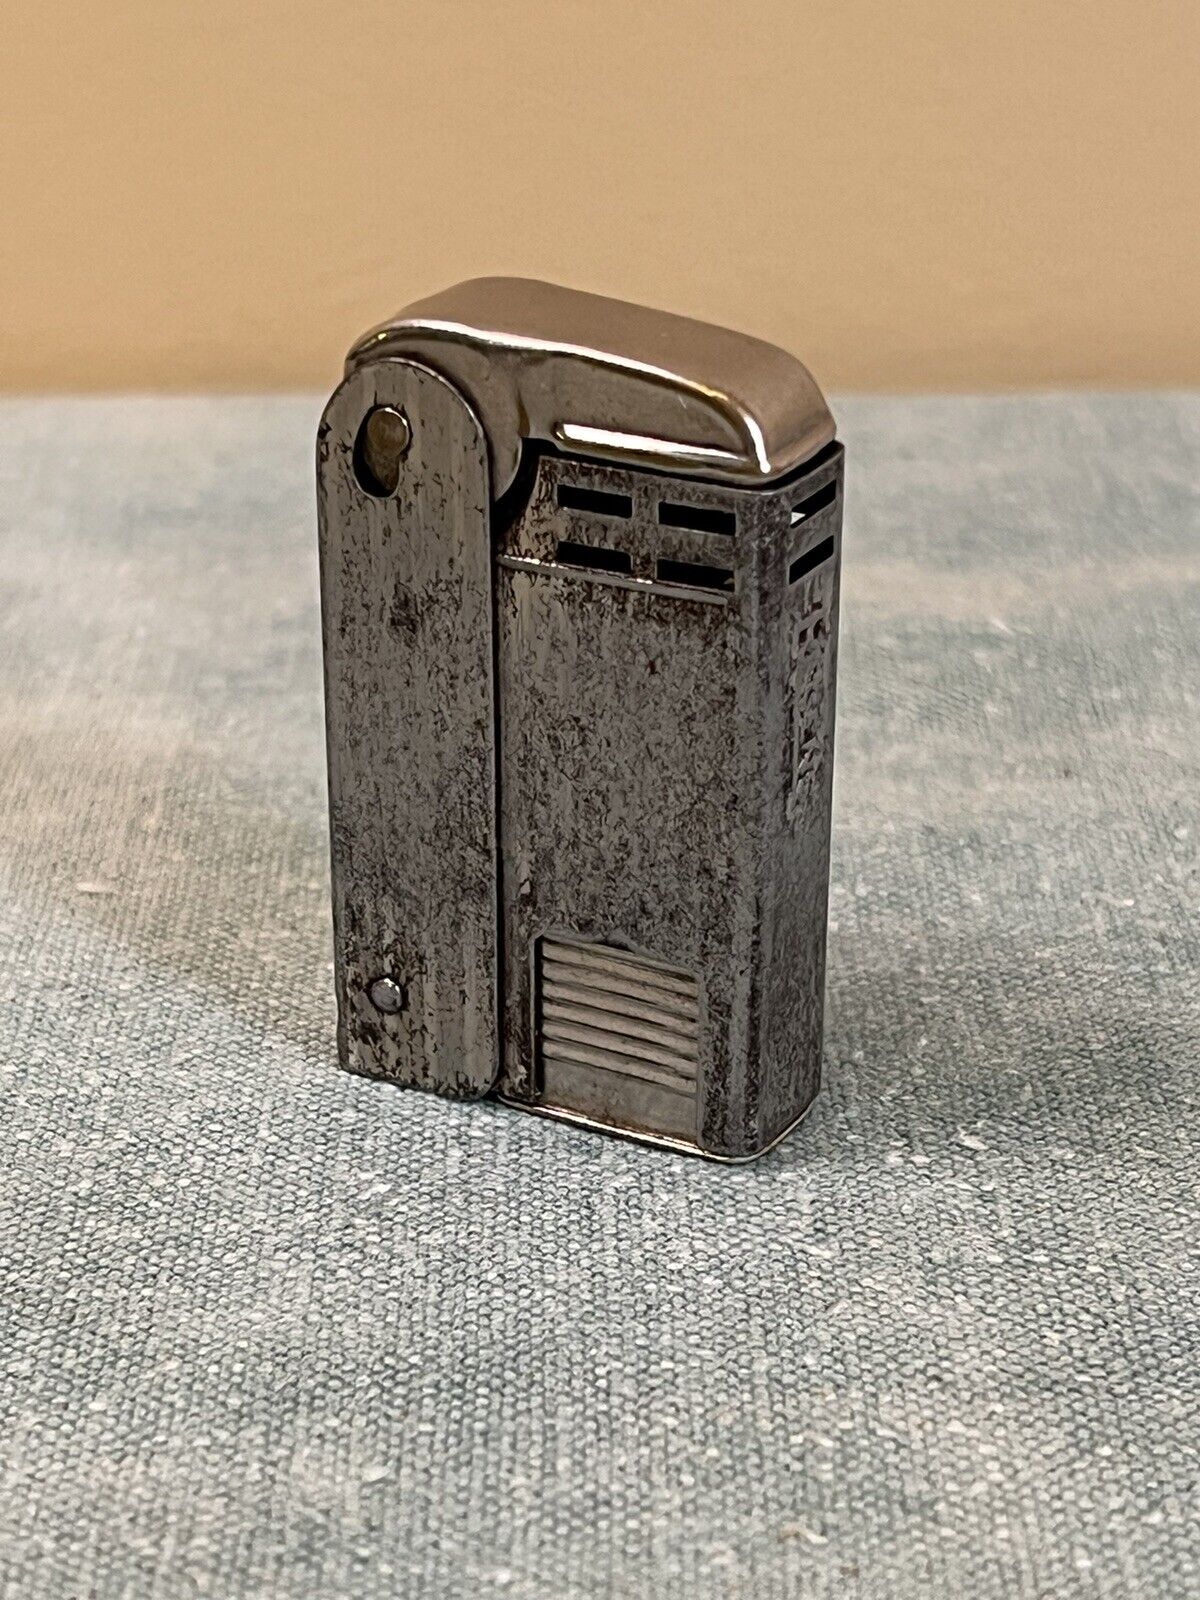 Vintage 1950s REGENS Fully Automatic Stormliter Lighter. Made in the USA